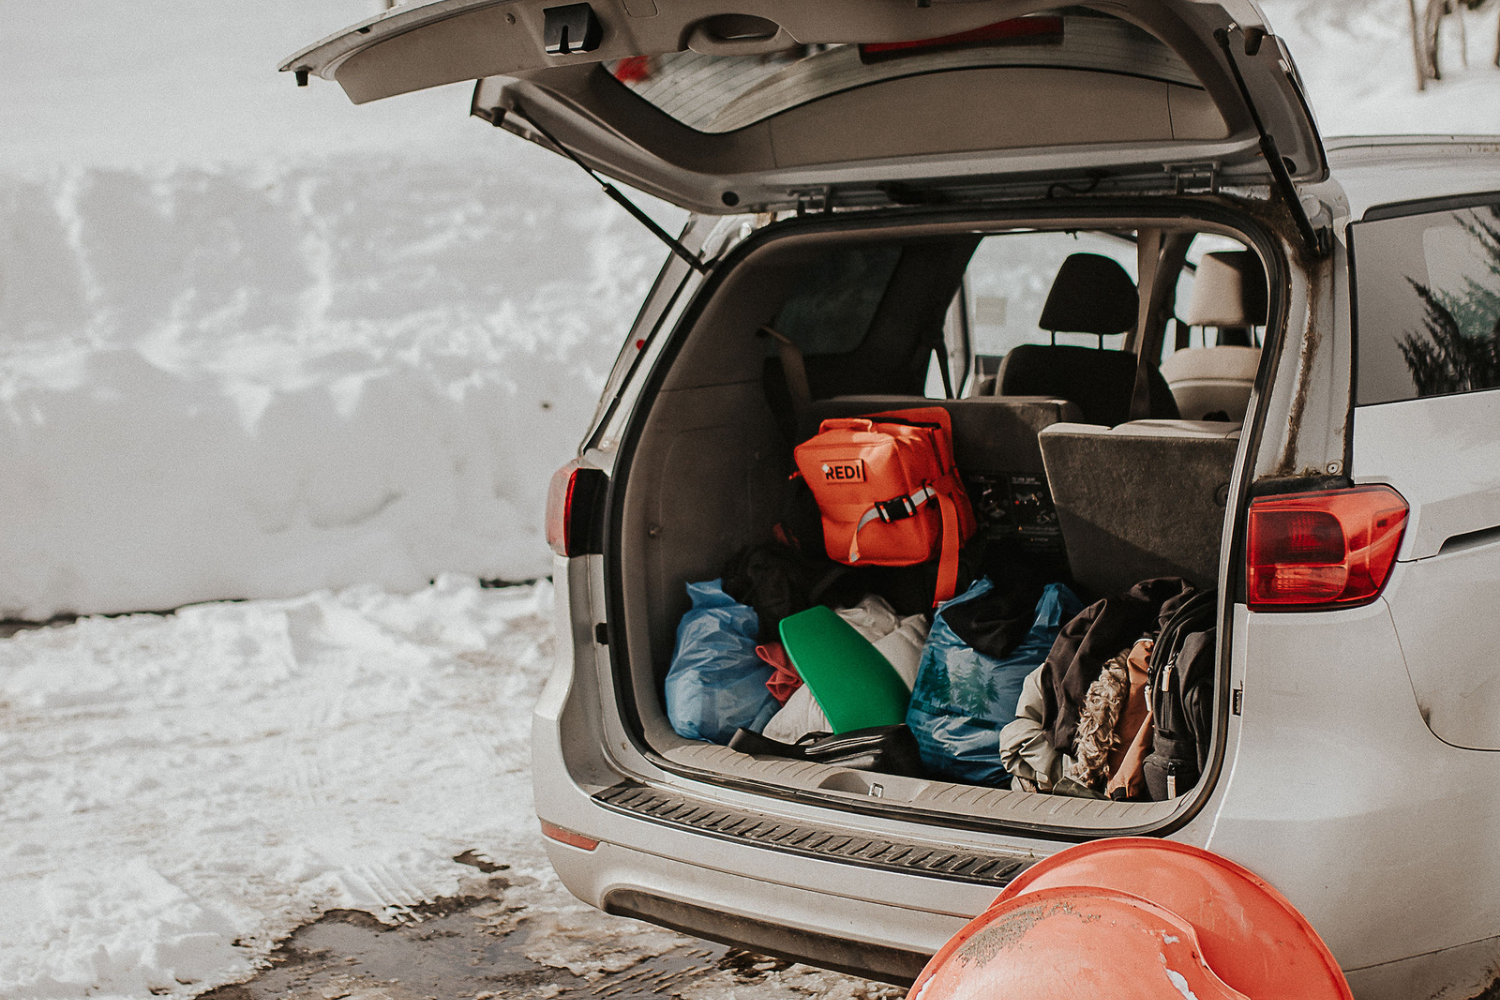 The Roadie first aid kit attached to the back seat of a van with the velcro mounting pad, with ski clothes and sleds in the back at a snowy location. 